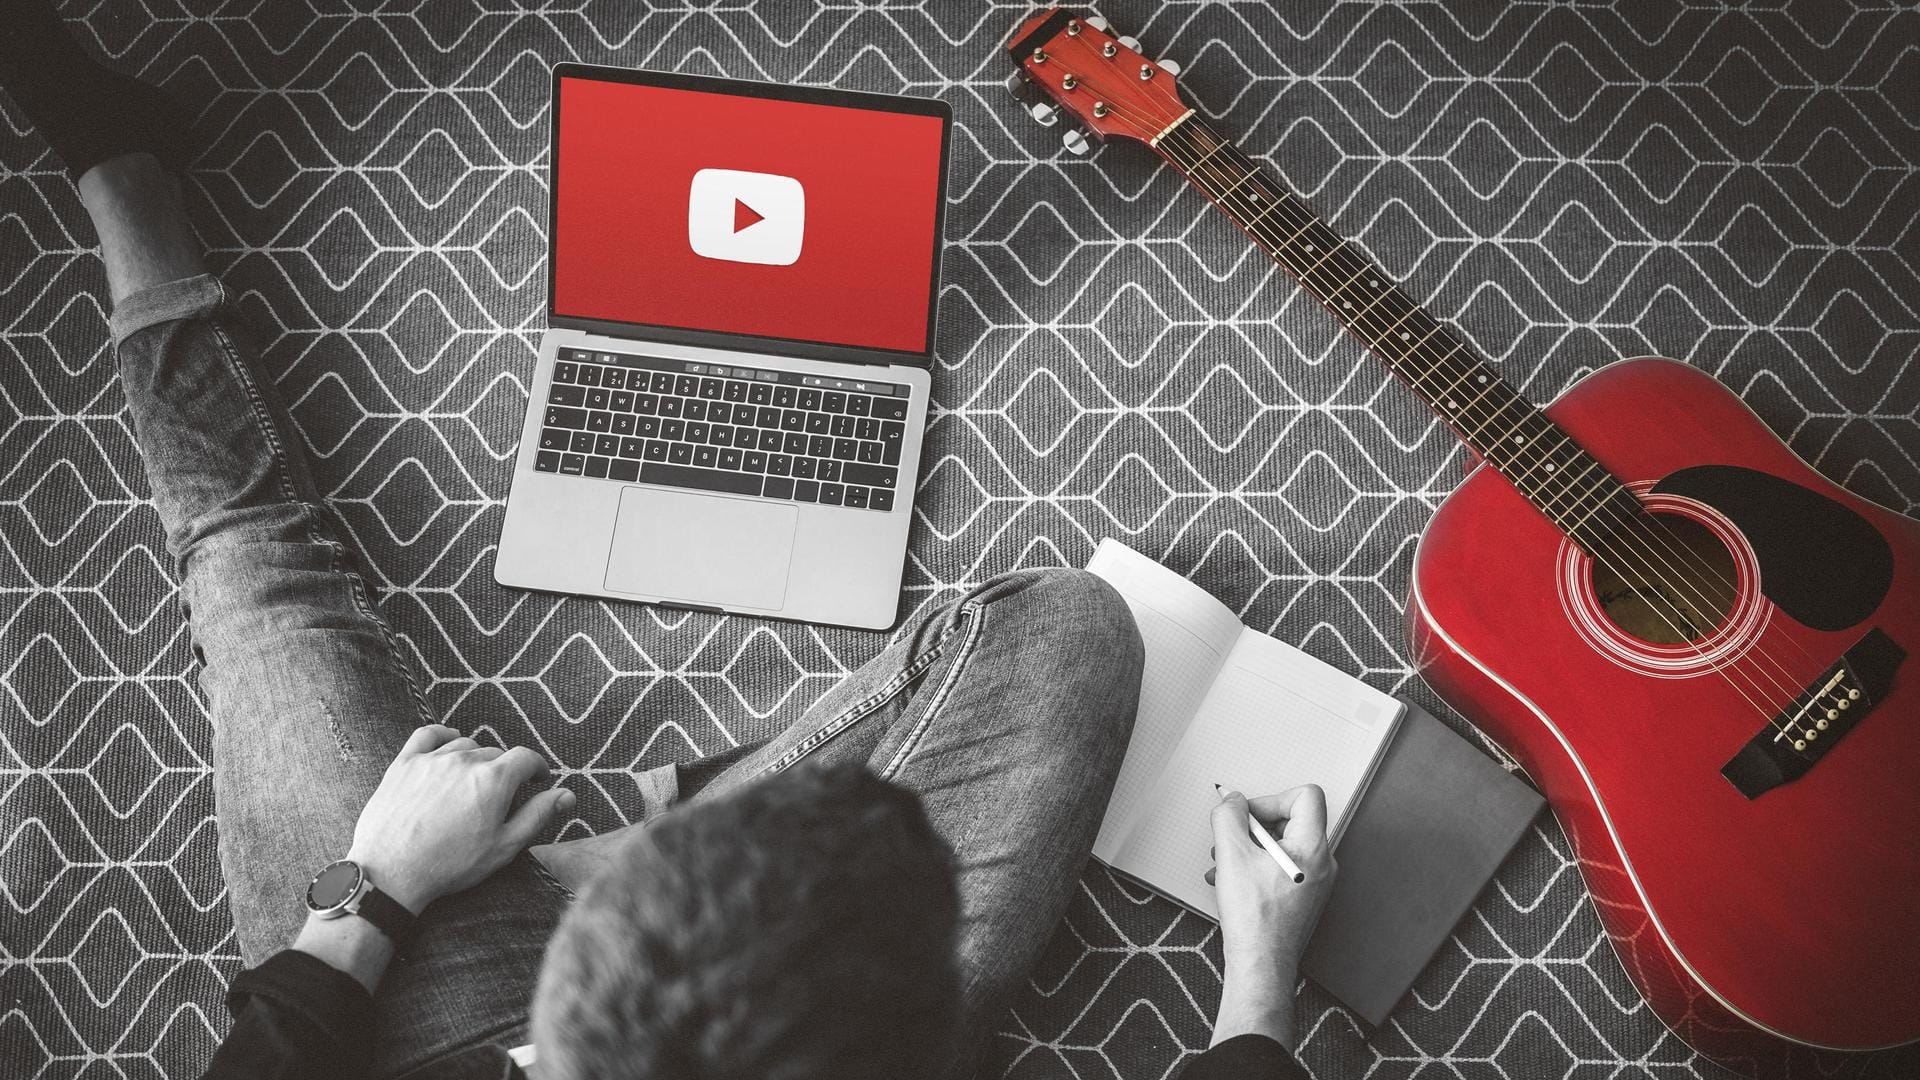 Want to learn guitar? Follow these 5 YouTube channels